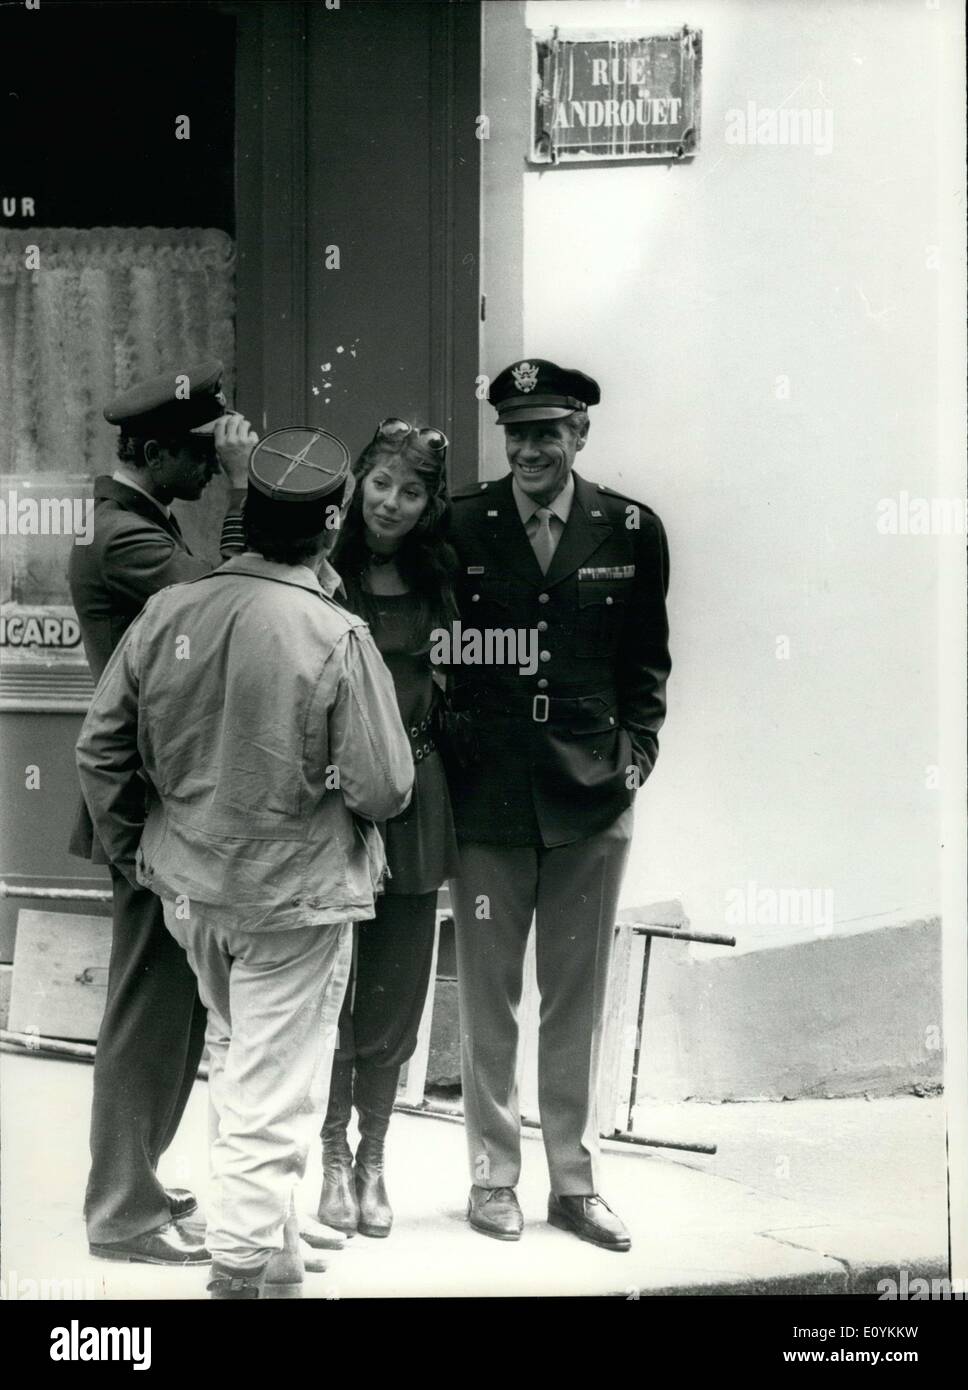 Aug. 27, 1970 - Two new lovers are walking the steep streets of Montmartre arm in arm where Mel Ferrer and Joanna Shimkus are currently filming ''The Time to Love'' with Britt Eelad. Mel Ferrer is an officer and Joanna Shimkus wears odd-looking puffy pants and big boots. Here is a picture of them during filming. Stock Photo